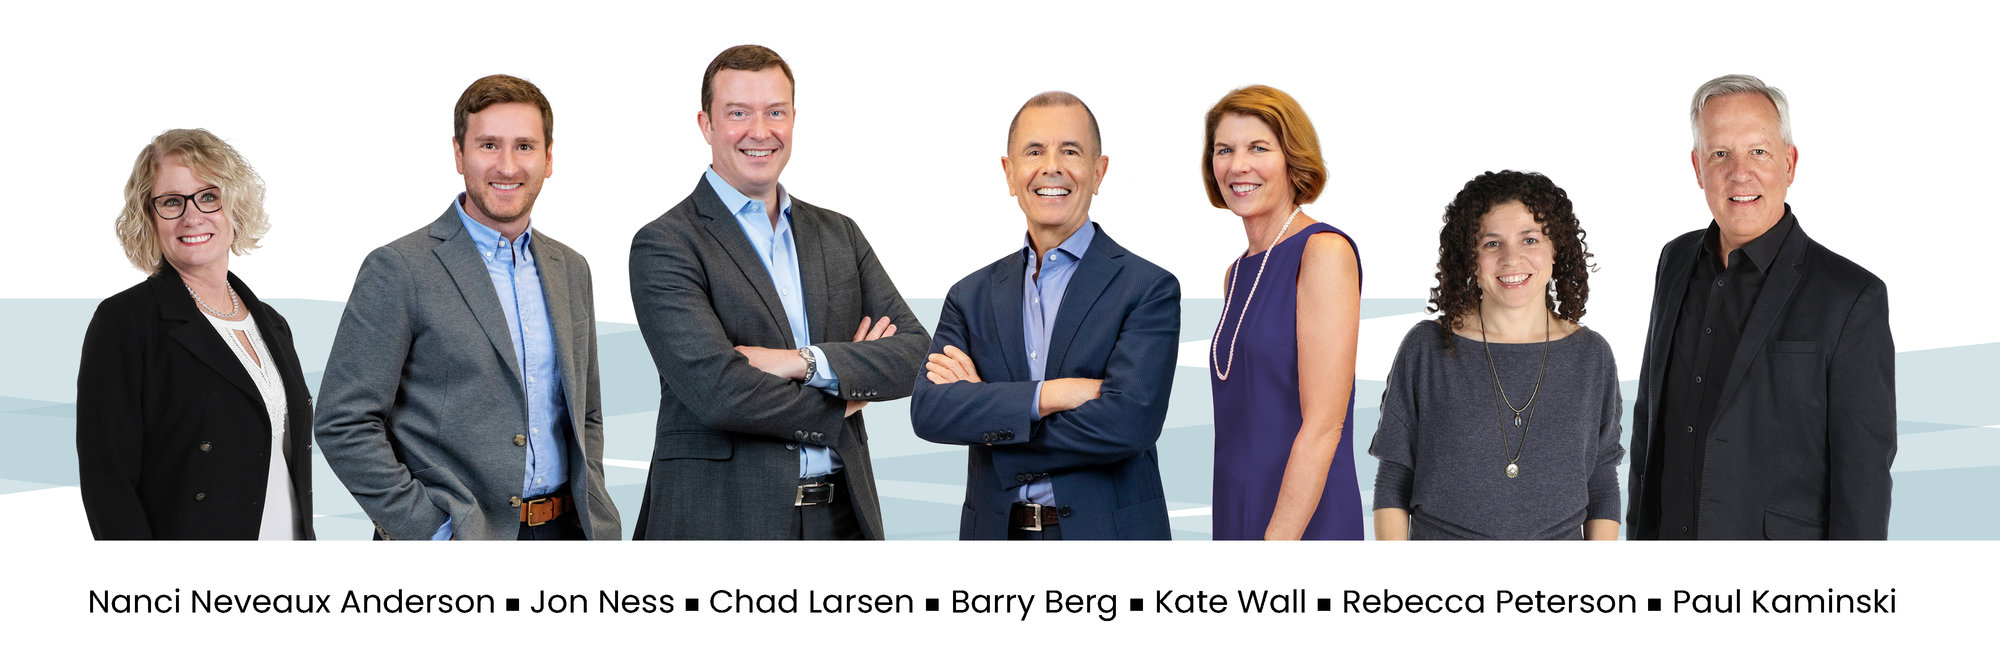 The Berg Larsen Group of professional realtors, on a white background. From left to Right: Nanci Anderson, Jon Ness, Chad Larsen, Barry Berg, Kate Wall, Rebecca Peterson, and Paul Kaminski